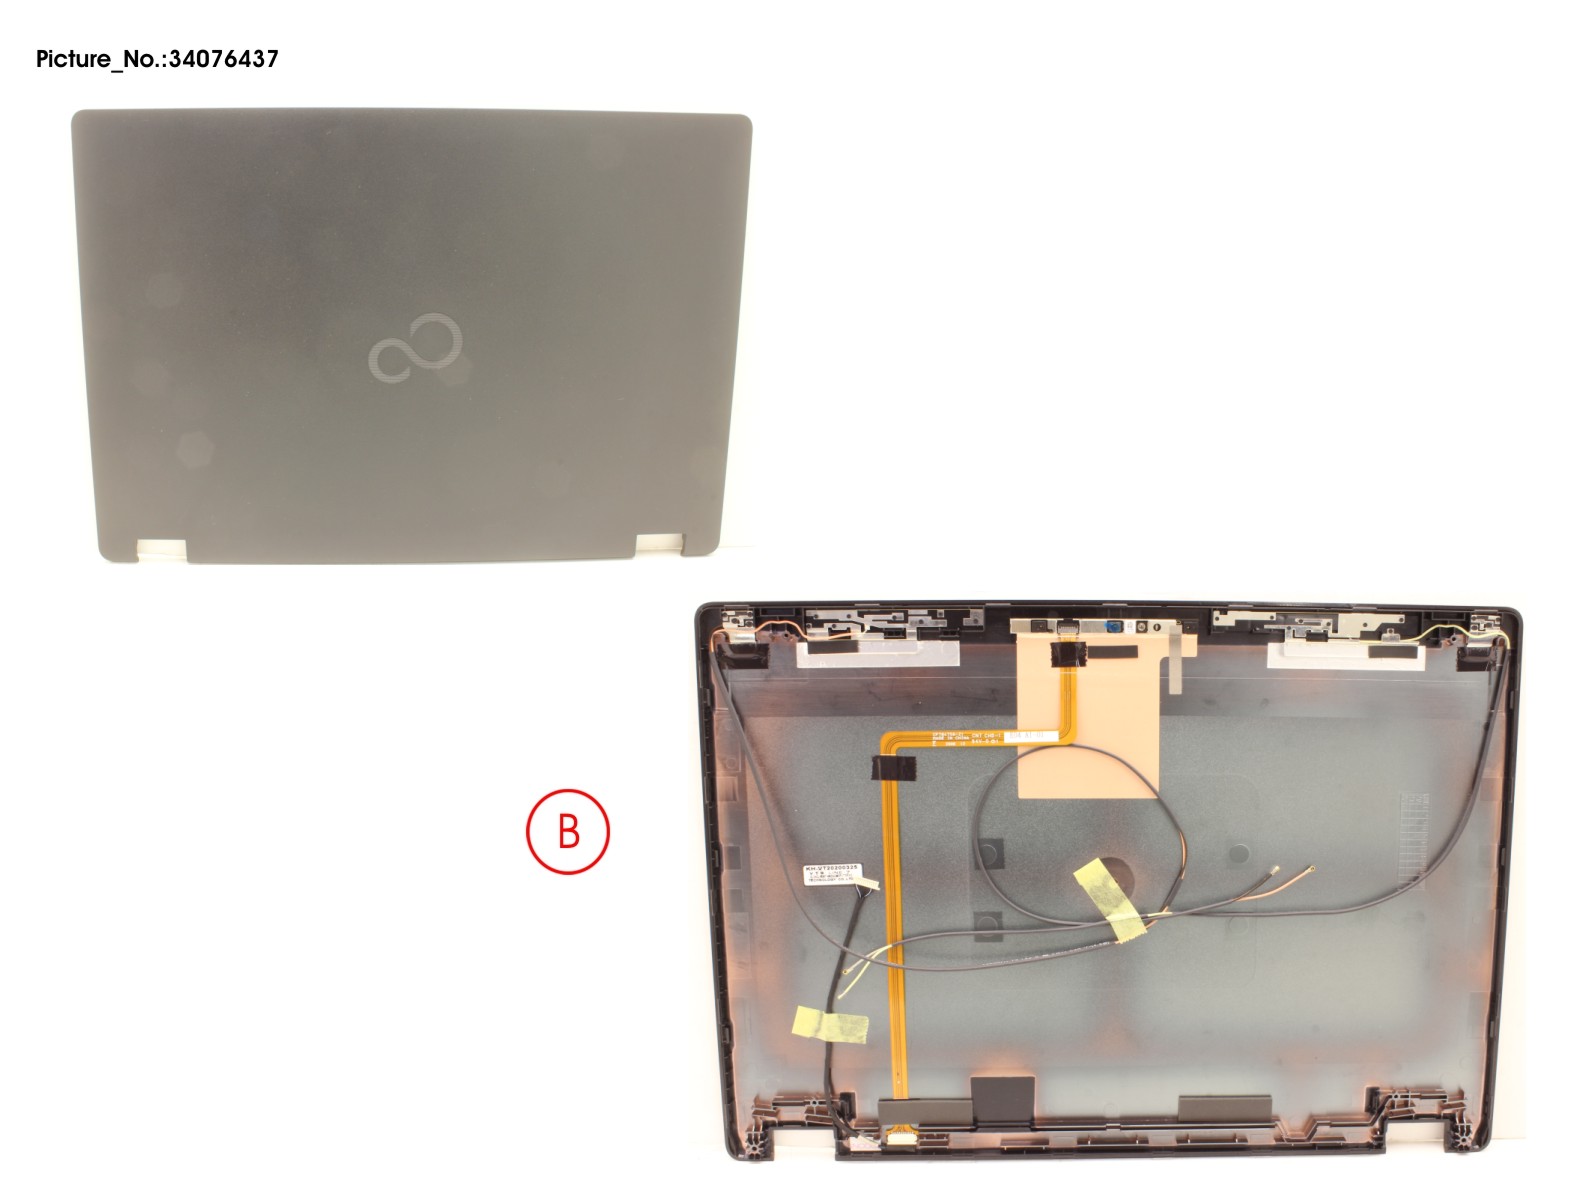 LCD BACK COVER ASSY(FHD, W/HELLO CAMERA)